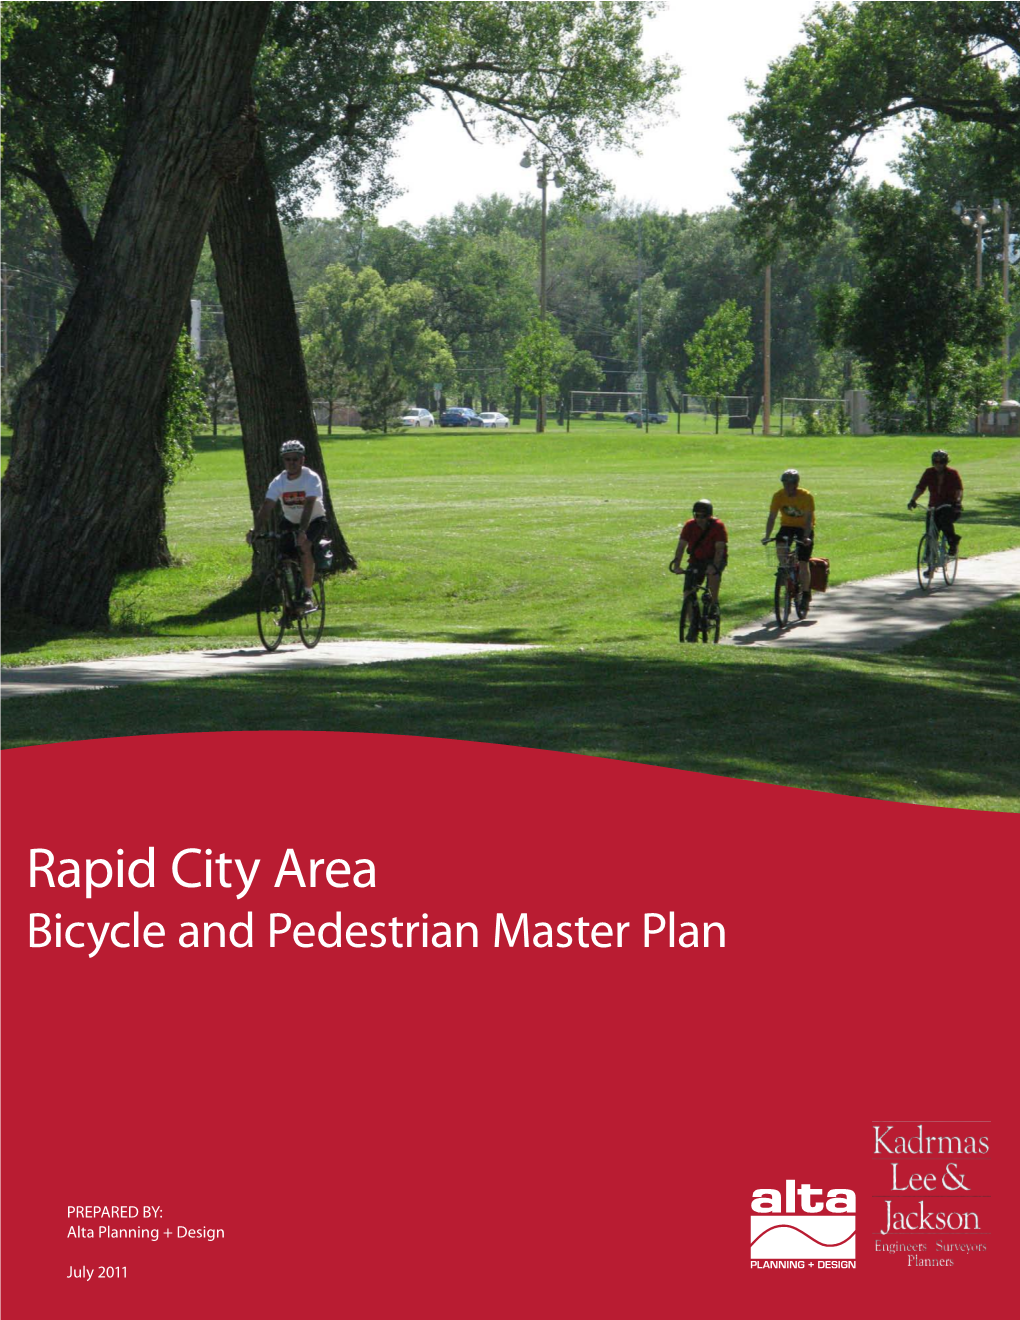 Rapid City Area Bicycle and Pedestrian Master Plan